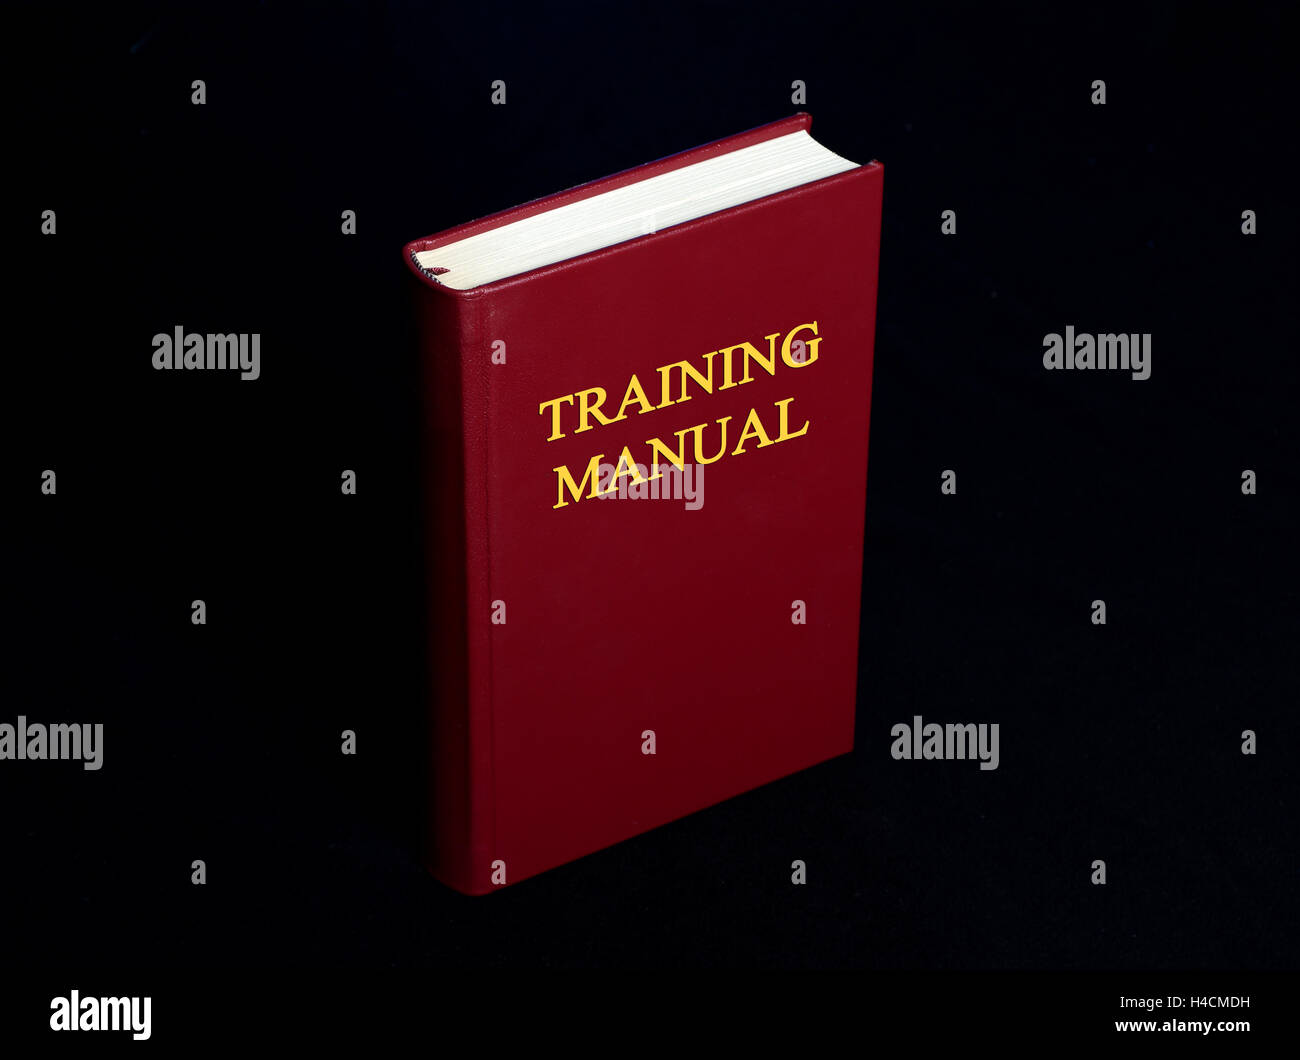 Training Manual Book Cover on Black Background. Stock Photo